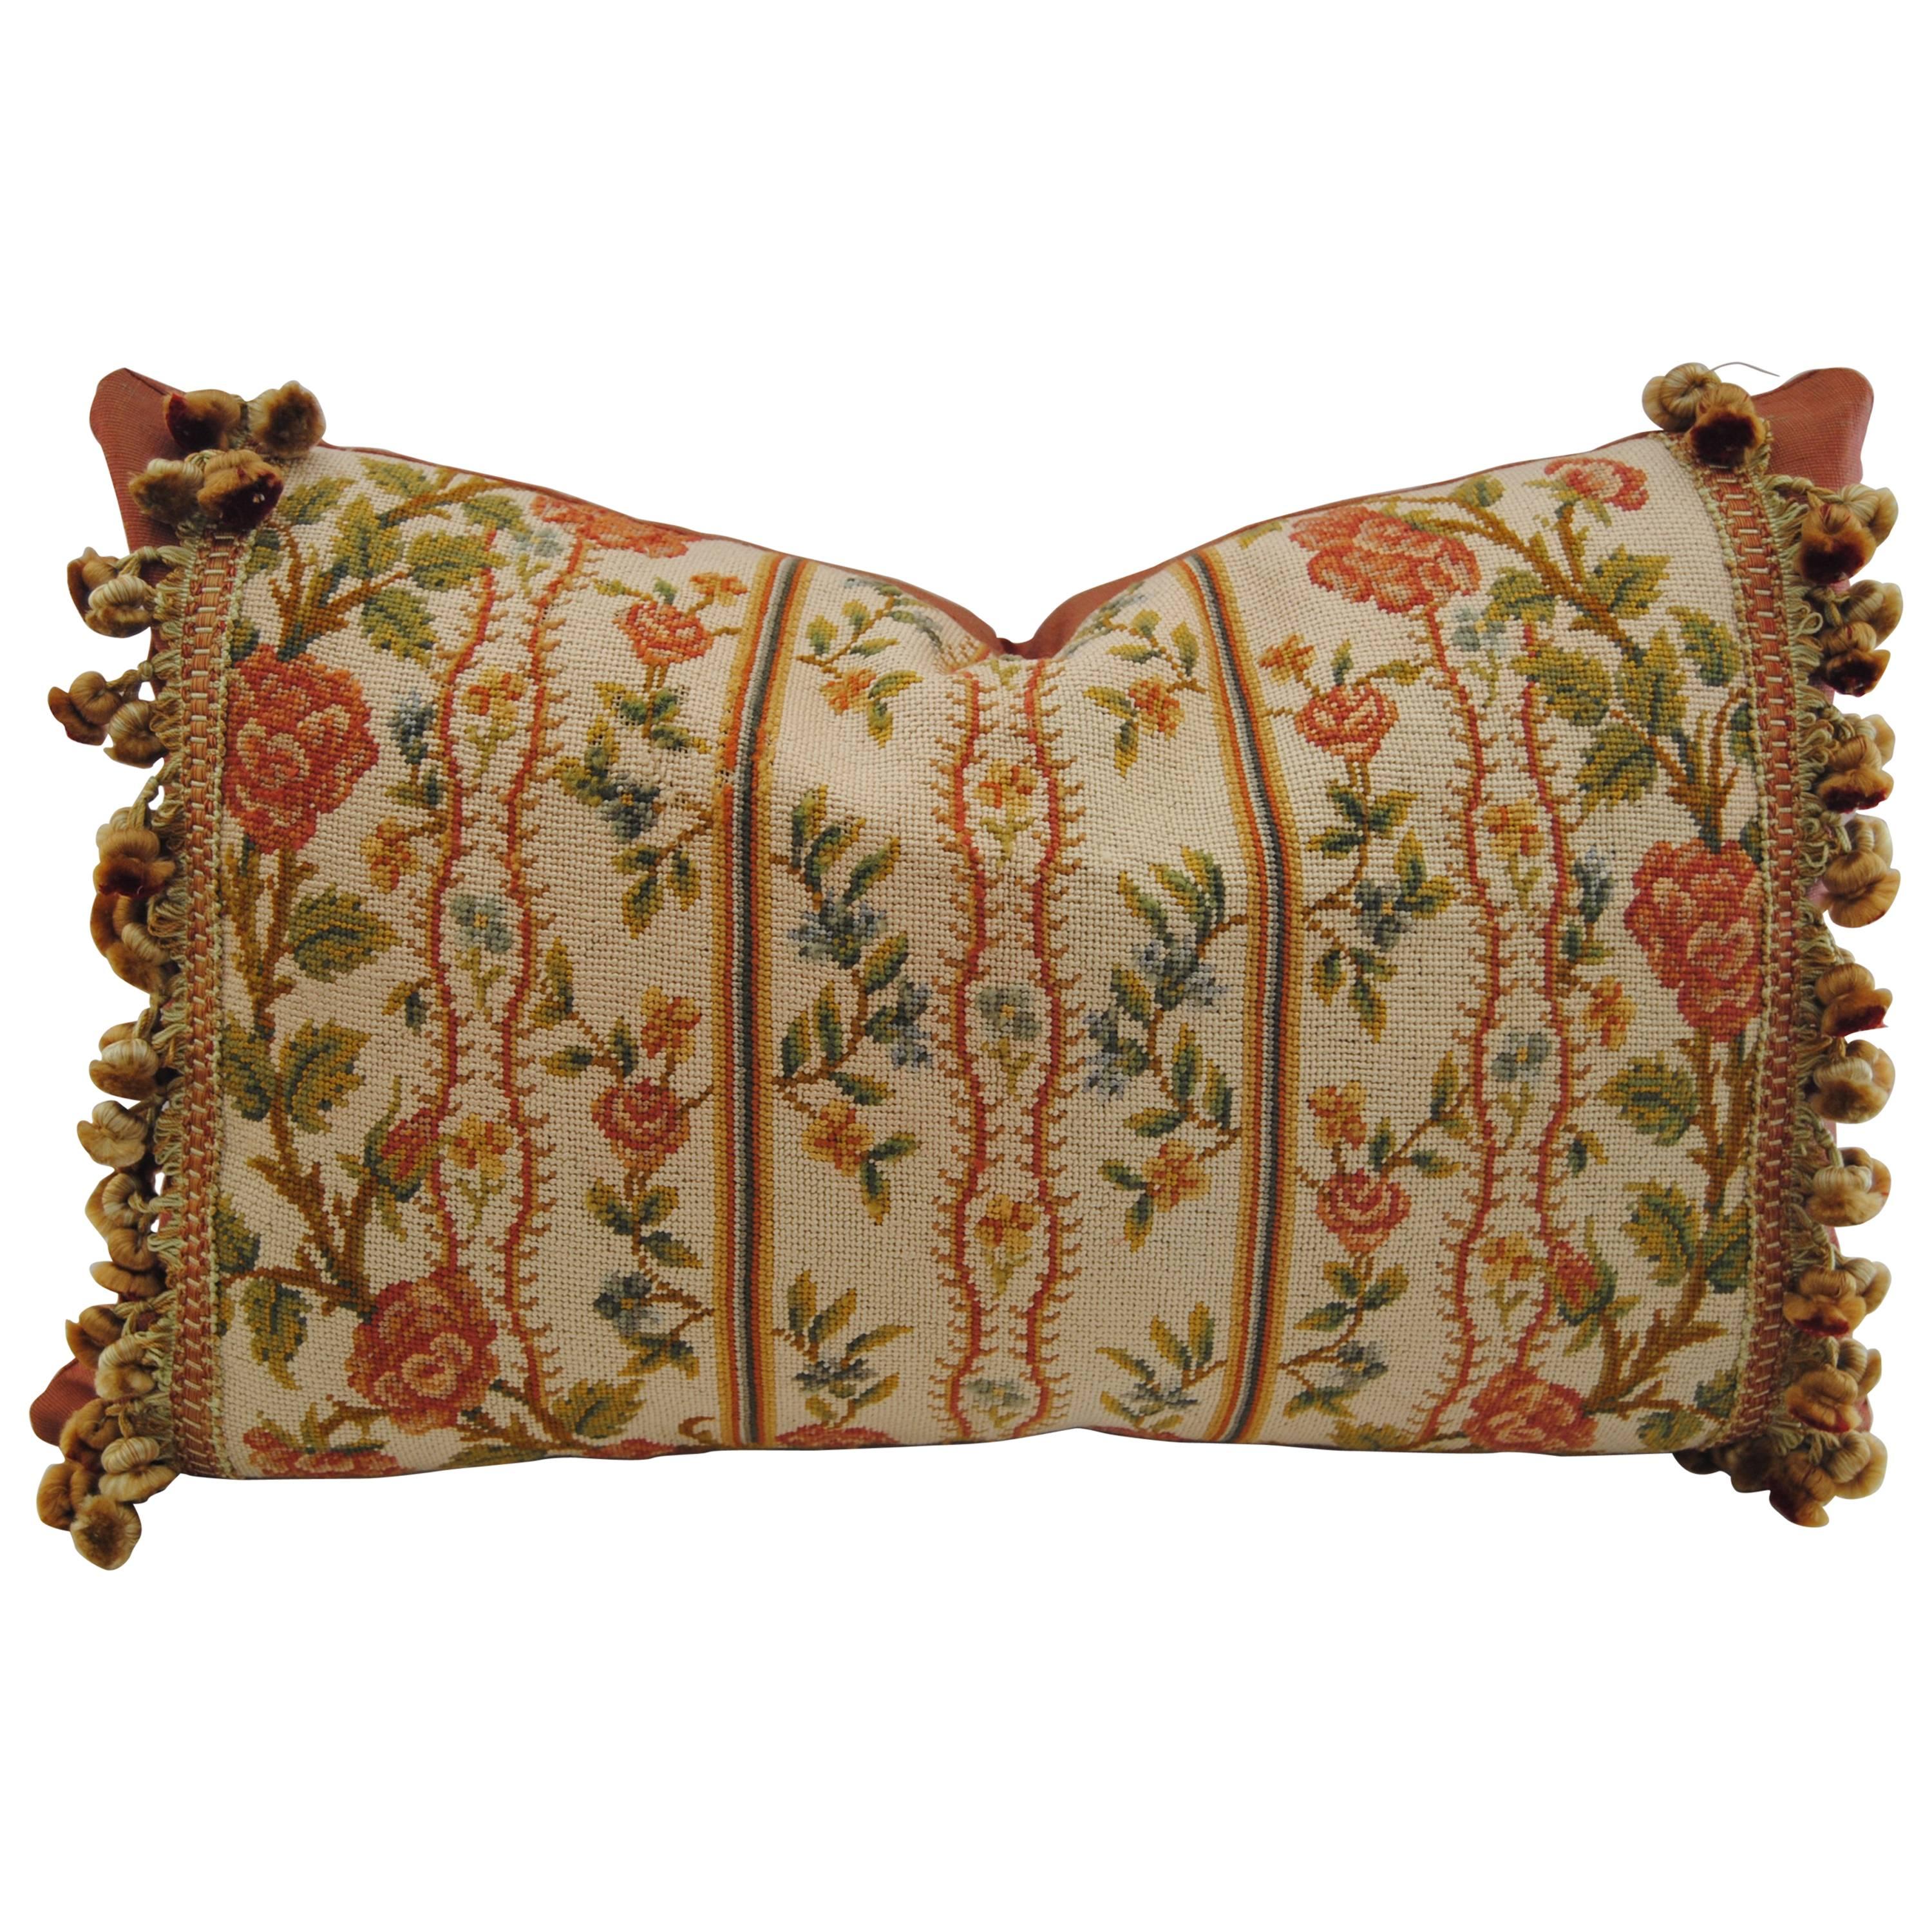 Antique French Needlepoint Pillow, Silk and Wool, Late 19th Century For Sale